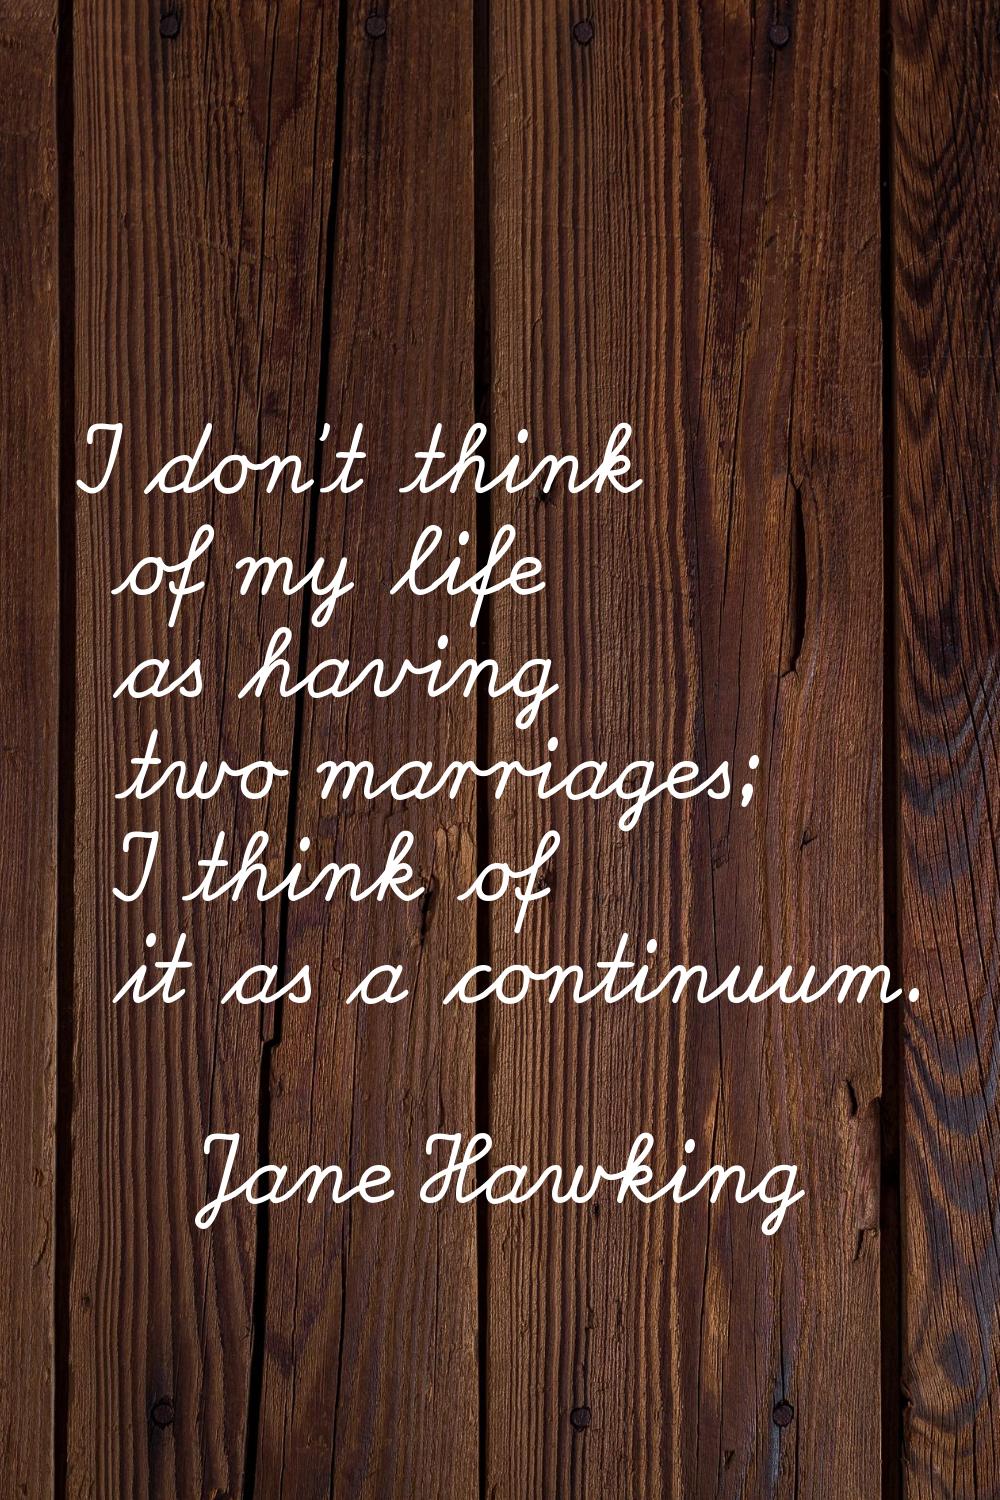 I don't think of my life as having two marriages; I think of it as a continuum.